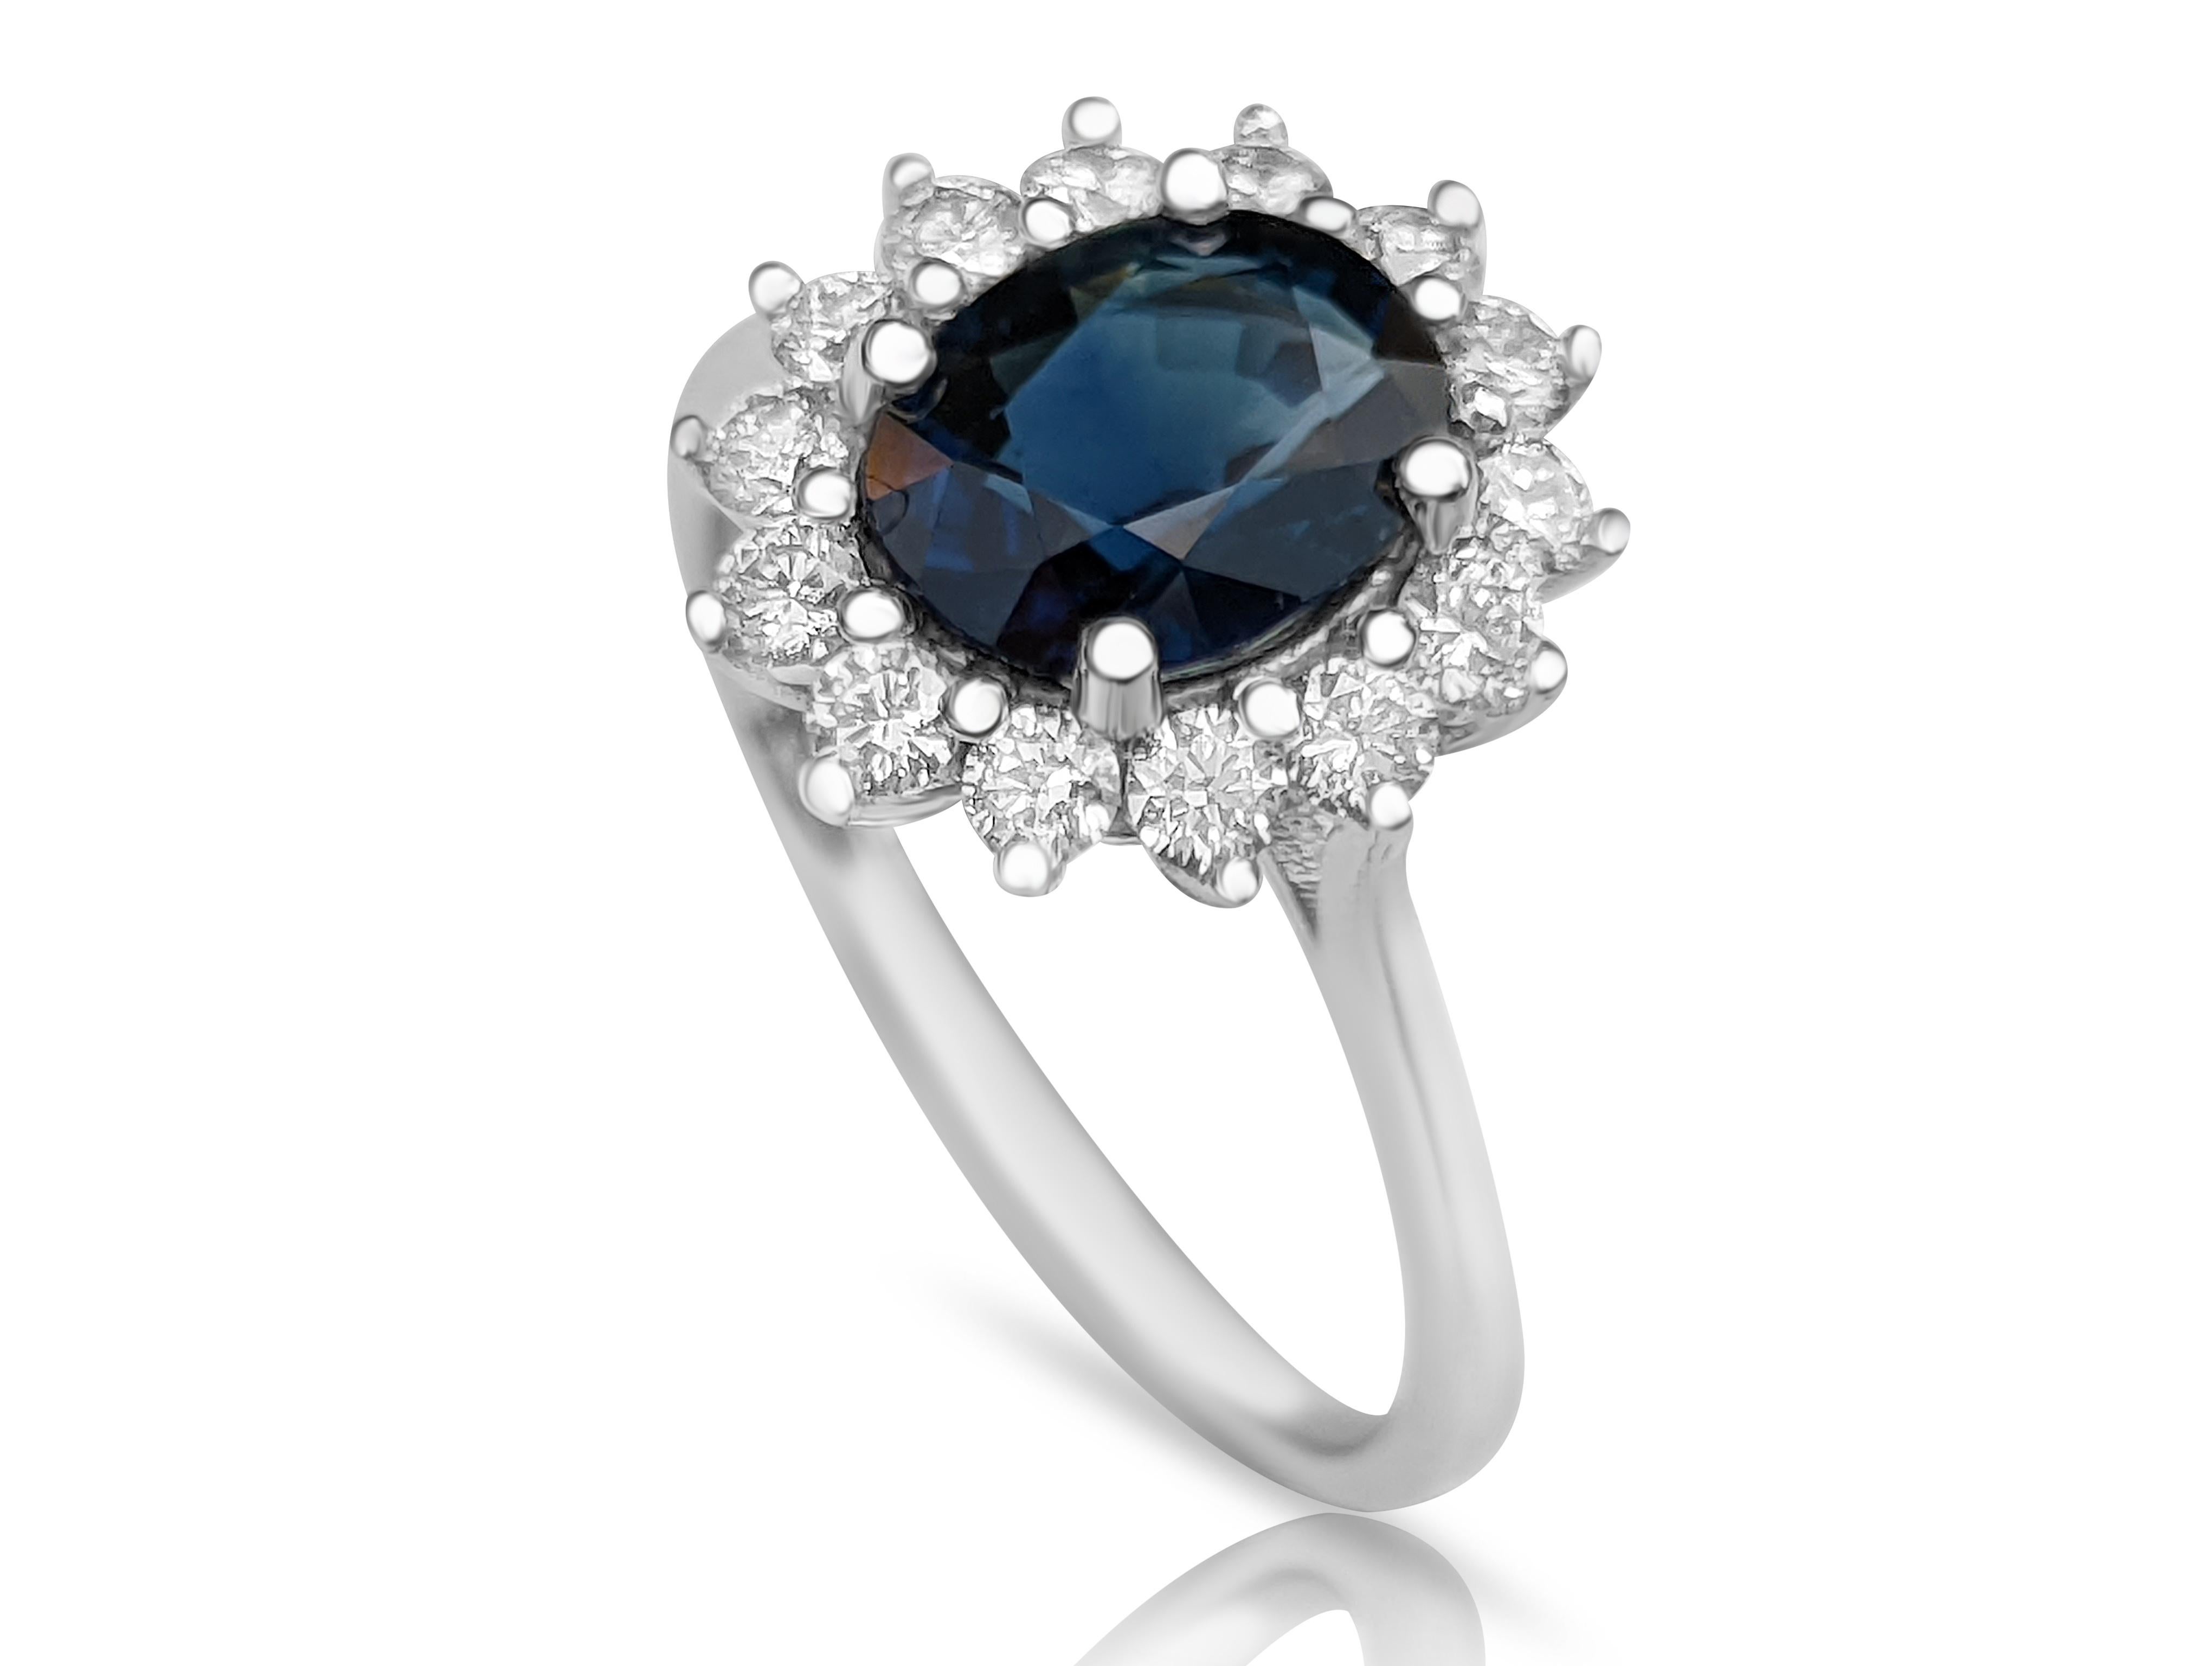 Women's 1.81 Carat Blue Sapphire and 0.50 Ct Diamonds Ring, 14 Kt. White Gold, Ring